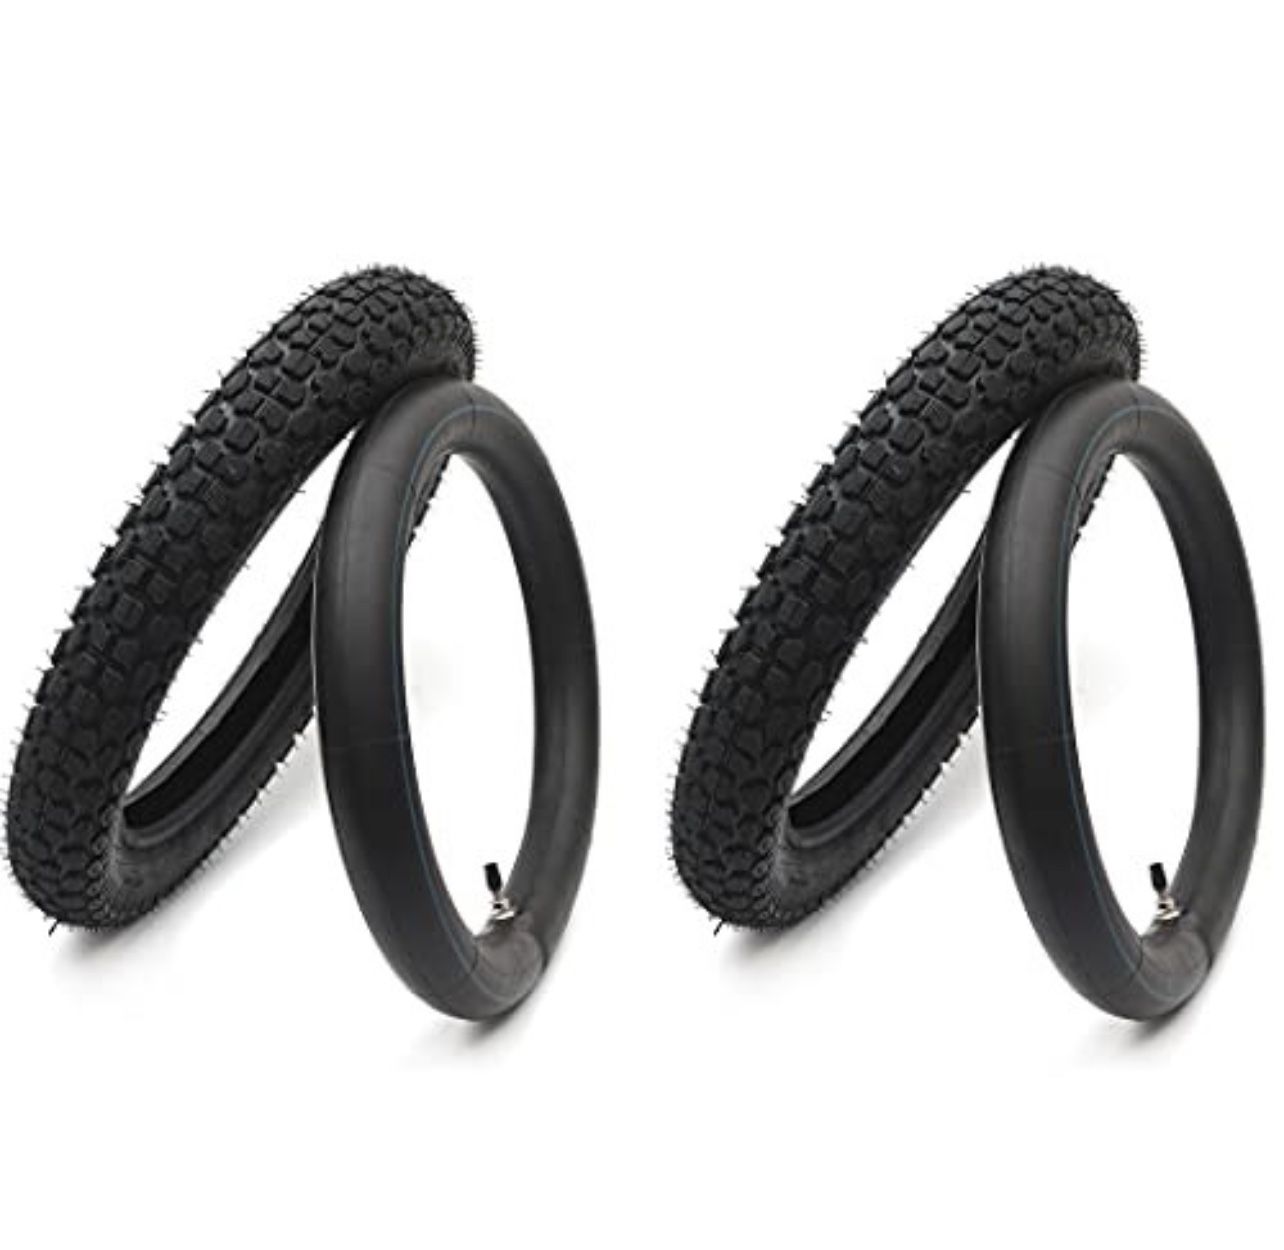 (2-Pack) 2.5/2.75-14” Replacement Dirt Bike Inner Tubes - 60/100-14” Tire Tubes for 50cc to 160cc Di